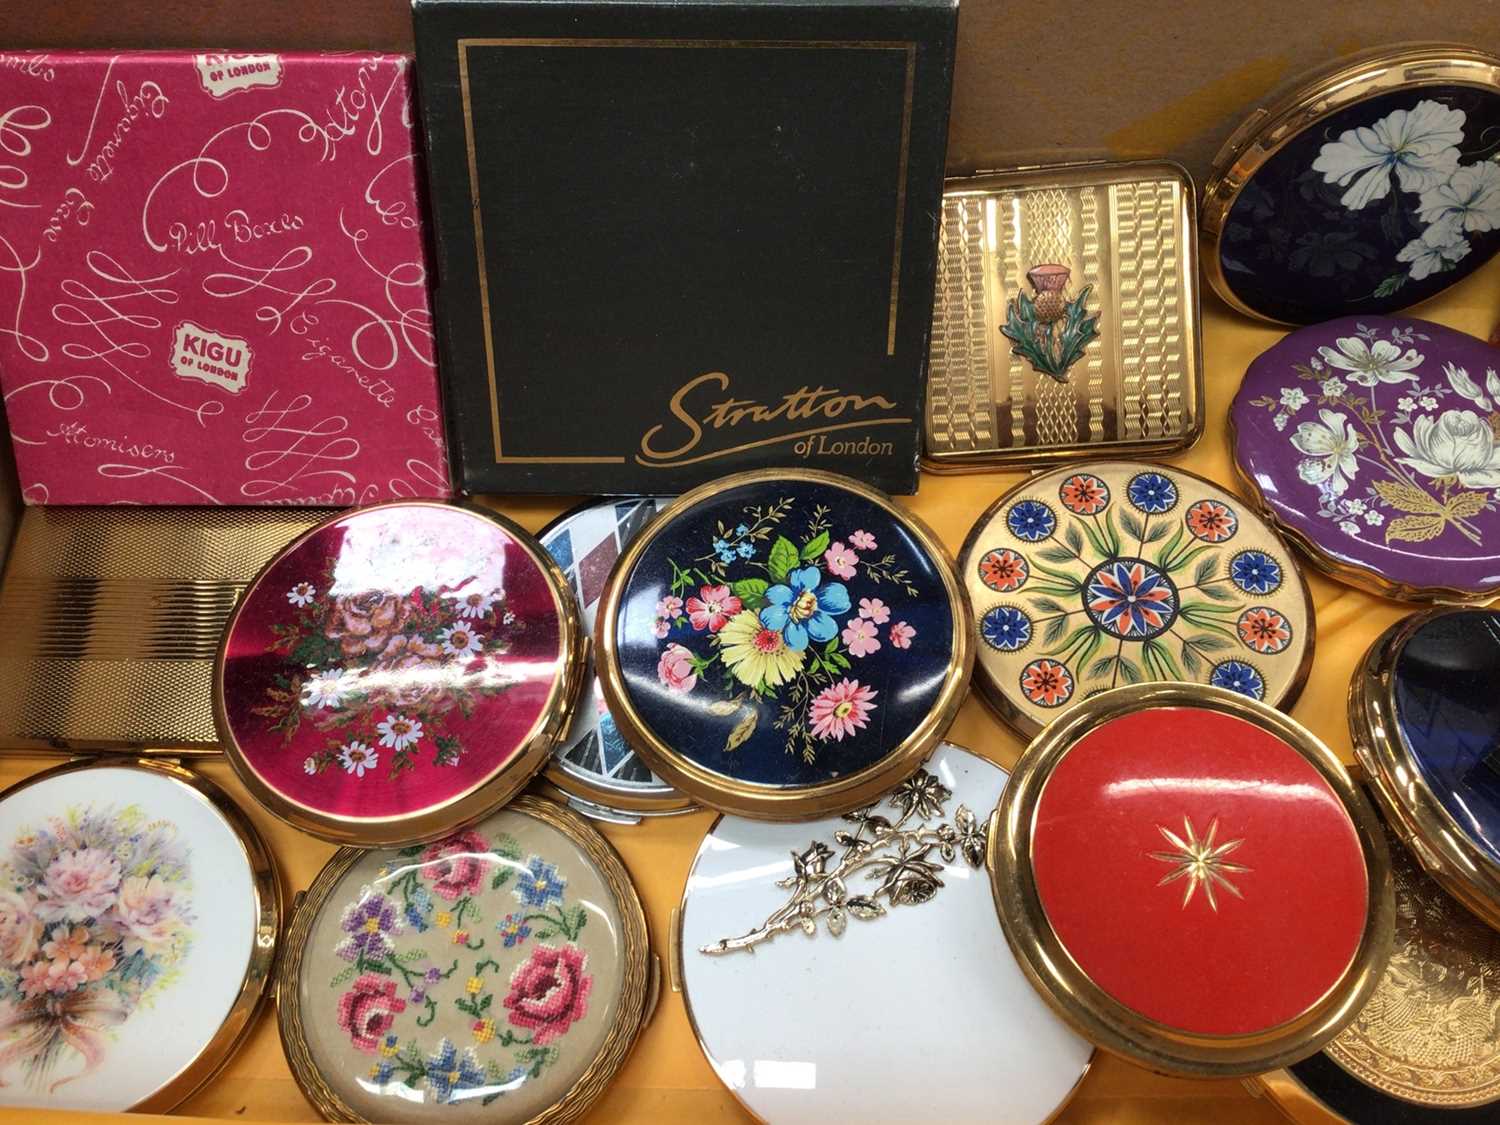 Collection of vintage compacts, mostly Stratton